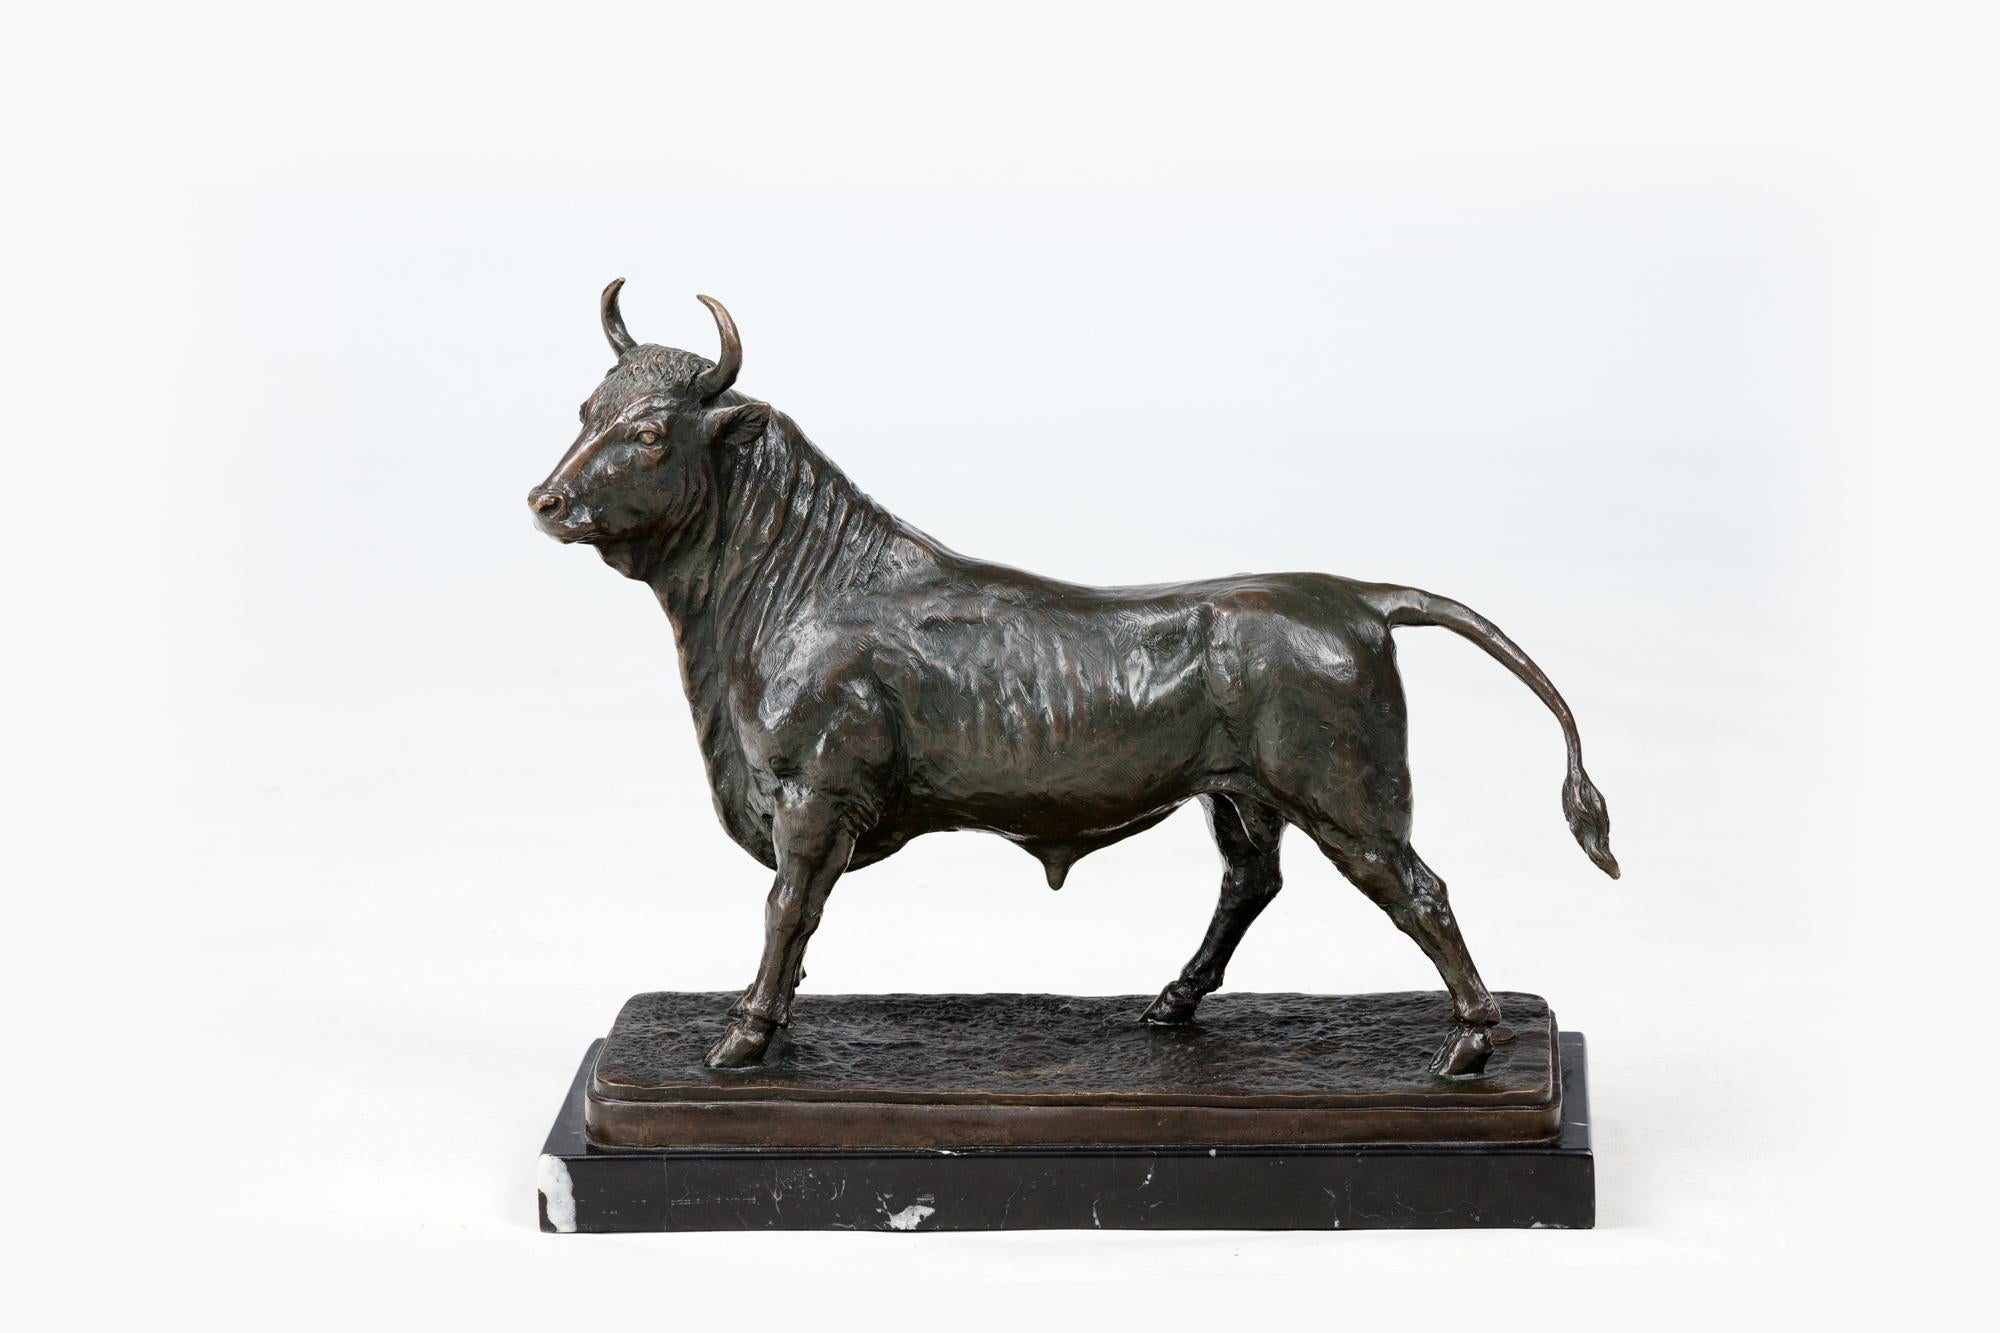 Late 19th Century Bronze Sculpture of a Bull by the French sculptor, Isidore Jules Bonheur. Set on a naturalistic base and raised on a black marble plinth. Signed 'I. Bonheur' and featuring a 'J.B. Deposee Bronze Garanti Paris' stamp to base.